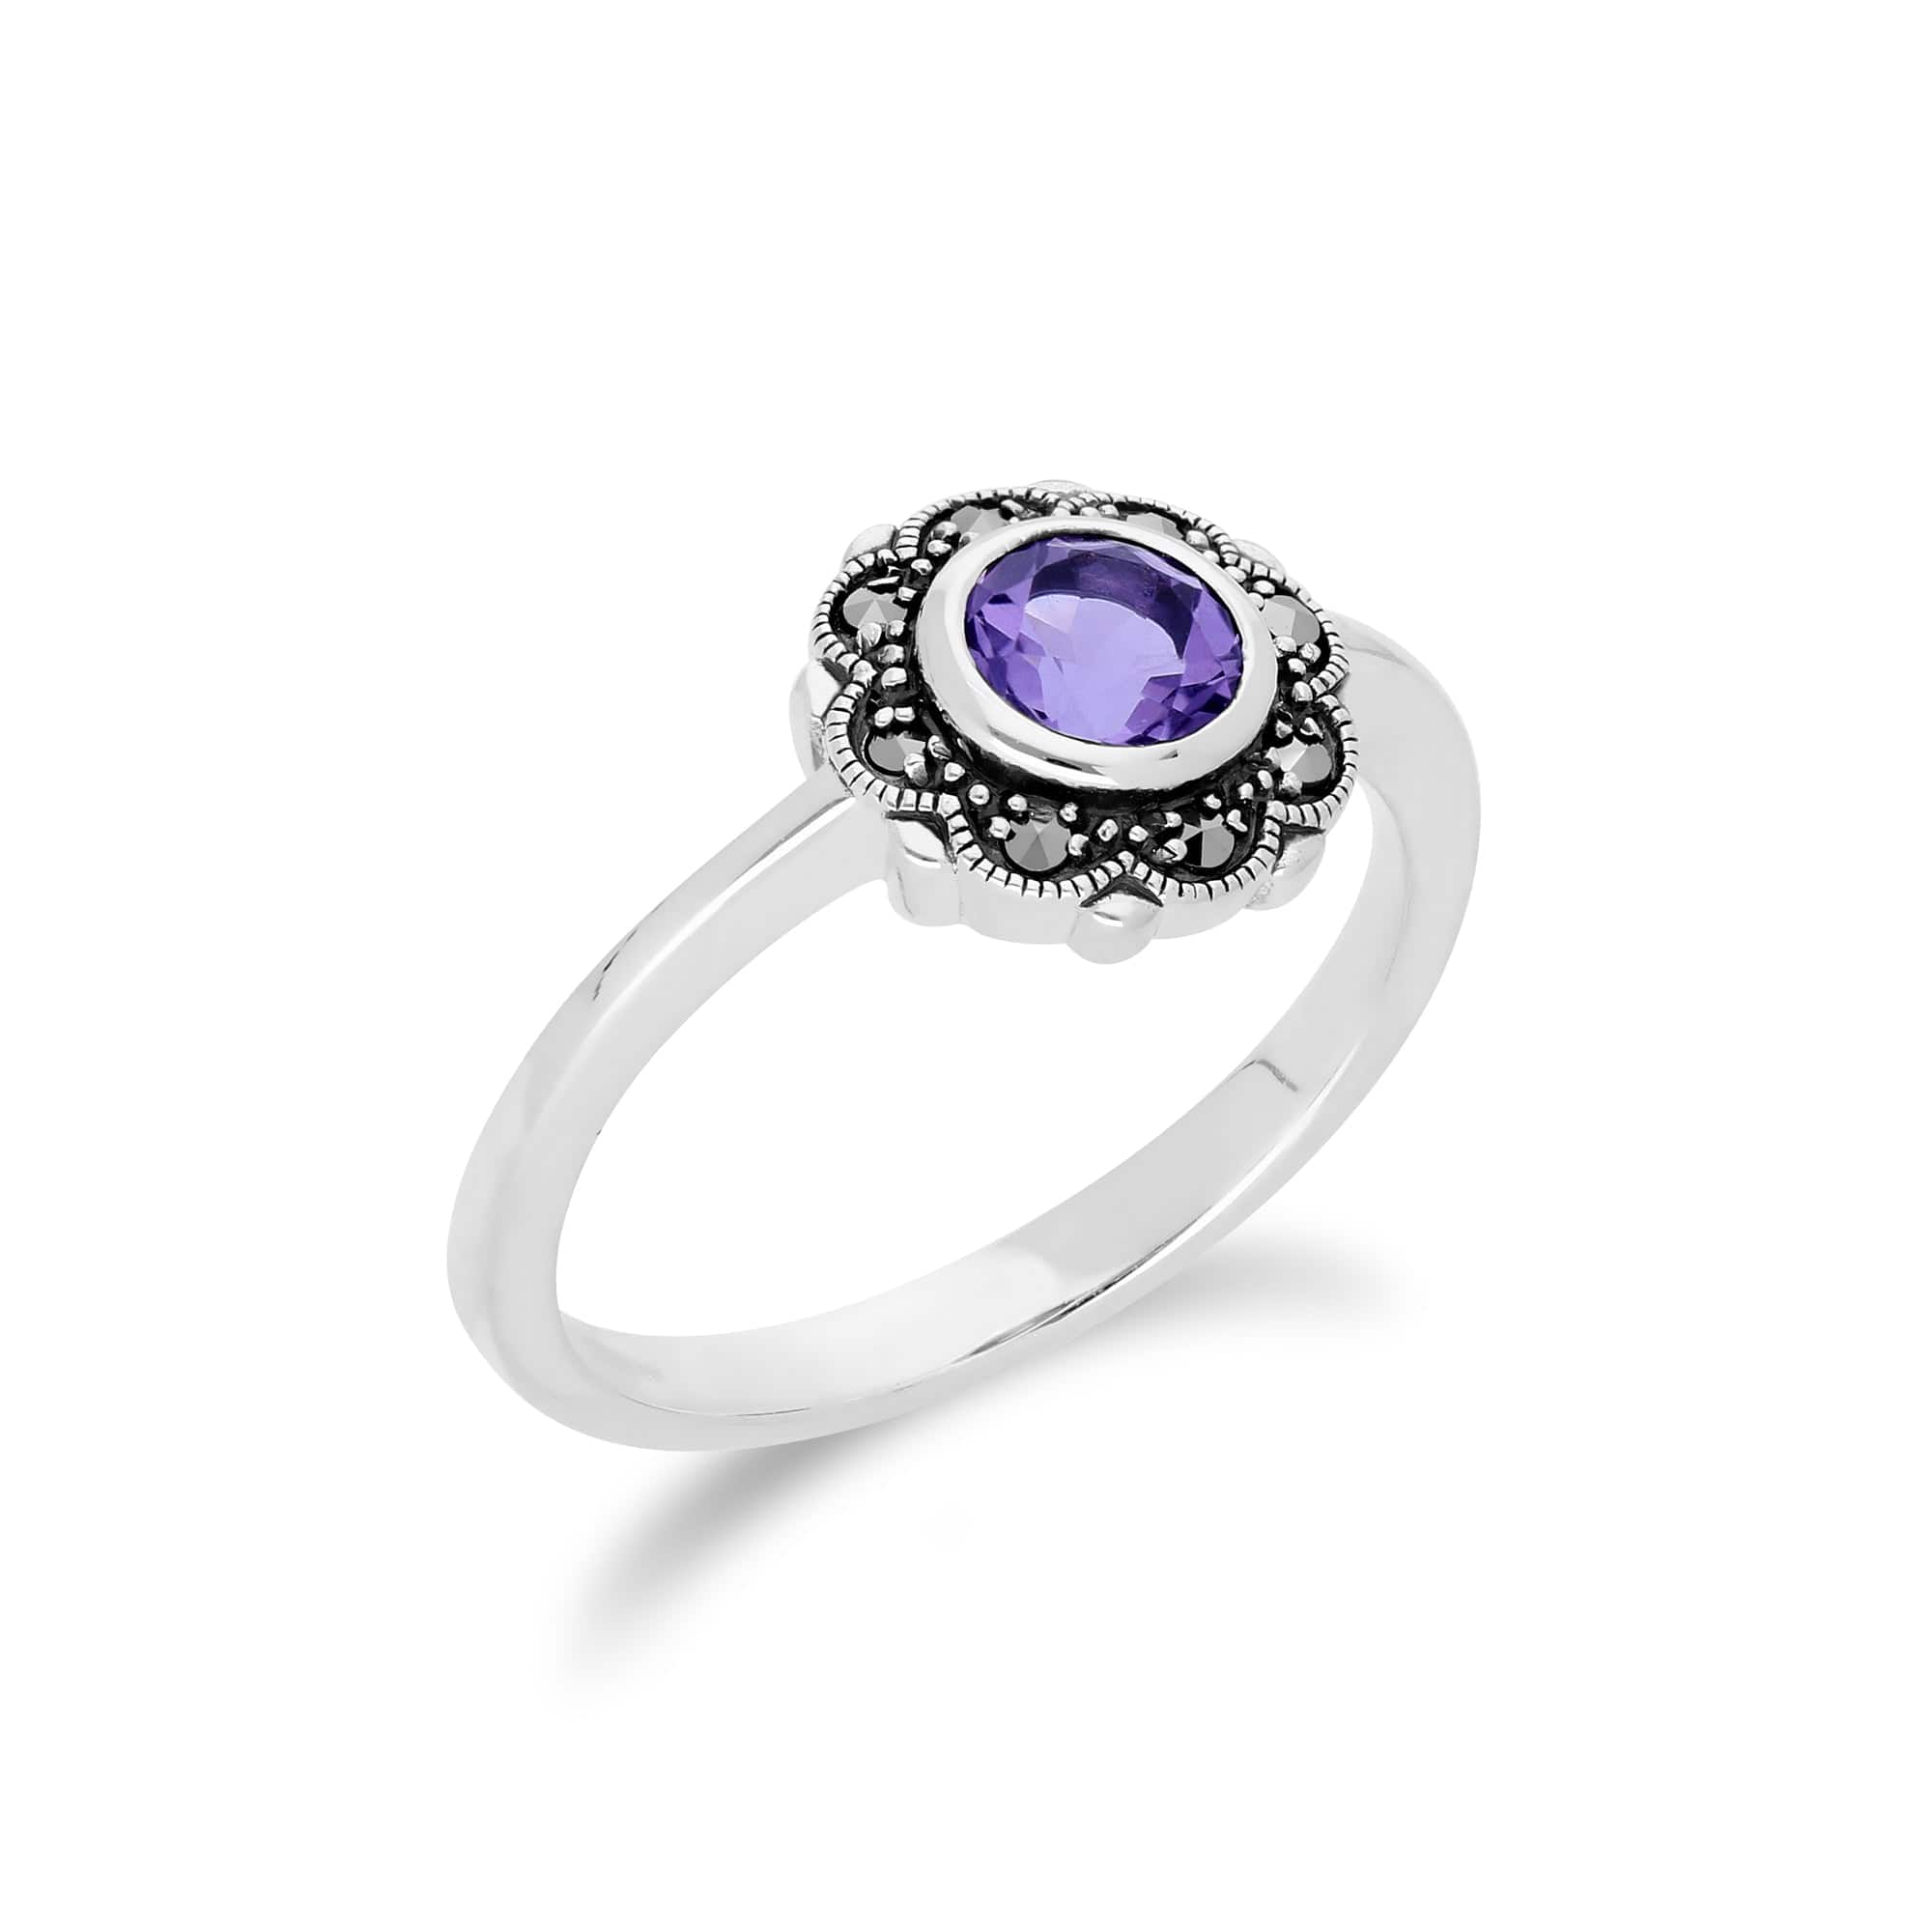 214R597002925 Floral Round Amethyst & Marcasite Halo Ring in 925 Sterling Silver 2